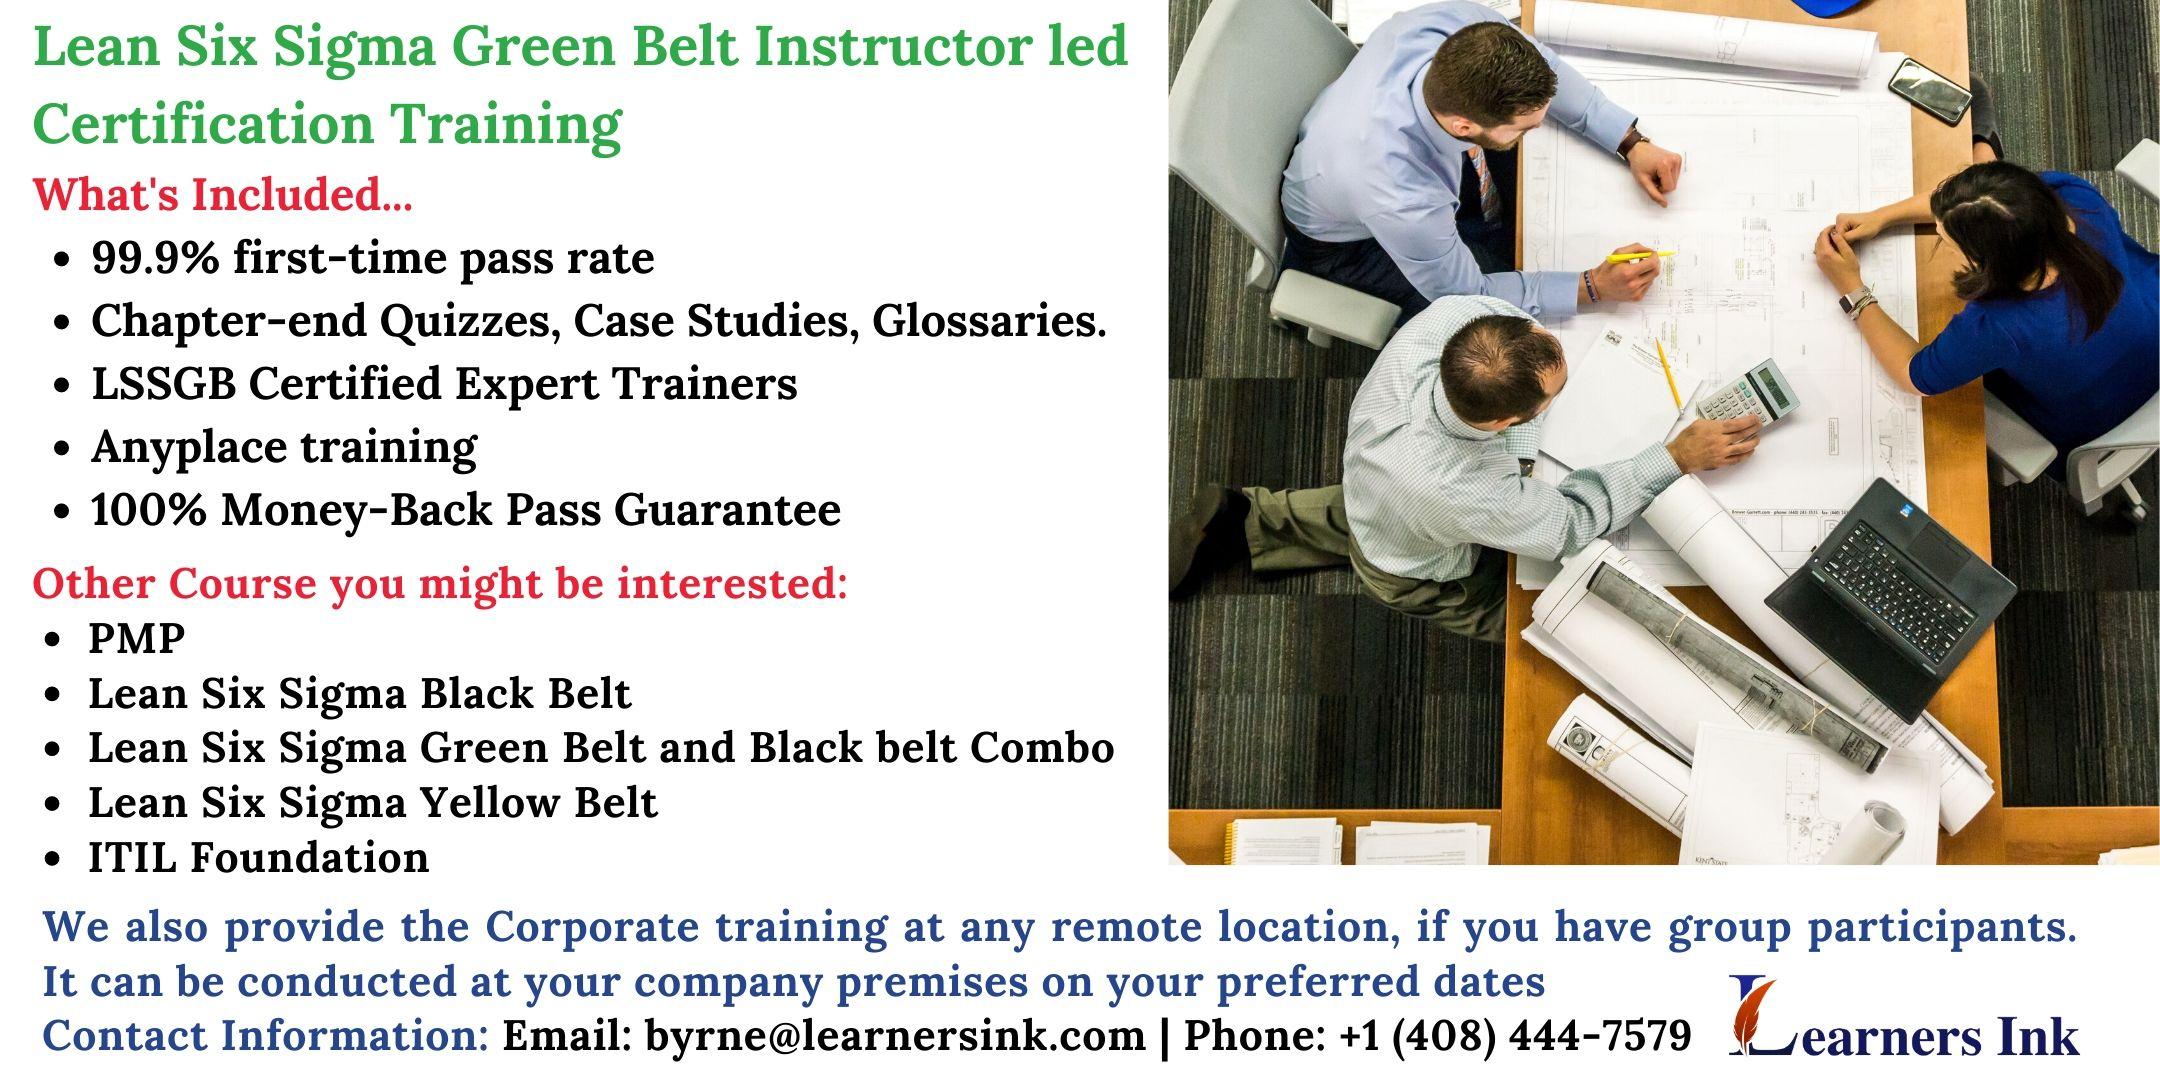 Lean Six Sigma Green Belt Certification Training Course (LSSGB) in Westminster